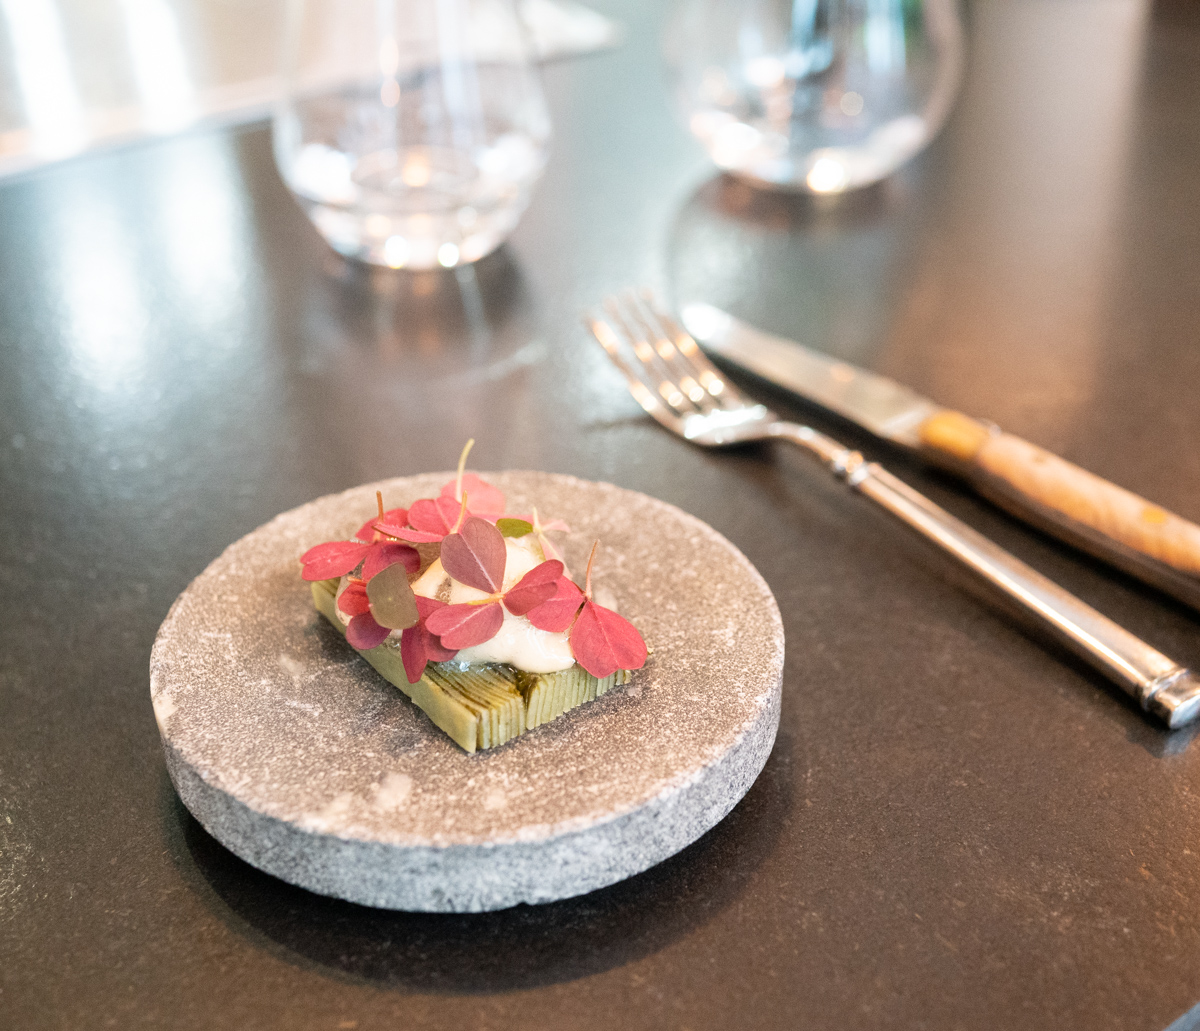 We started with a beautifully layered seaweed tartine, with layer upon layer of paper thin potatoes and seaweed. This was topped with an oyster foam and gelee. The taste of the ocean was the dominant flavor. Overall the dish was visually impressive and had a nice, pleasant flavor.